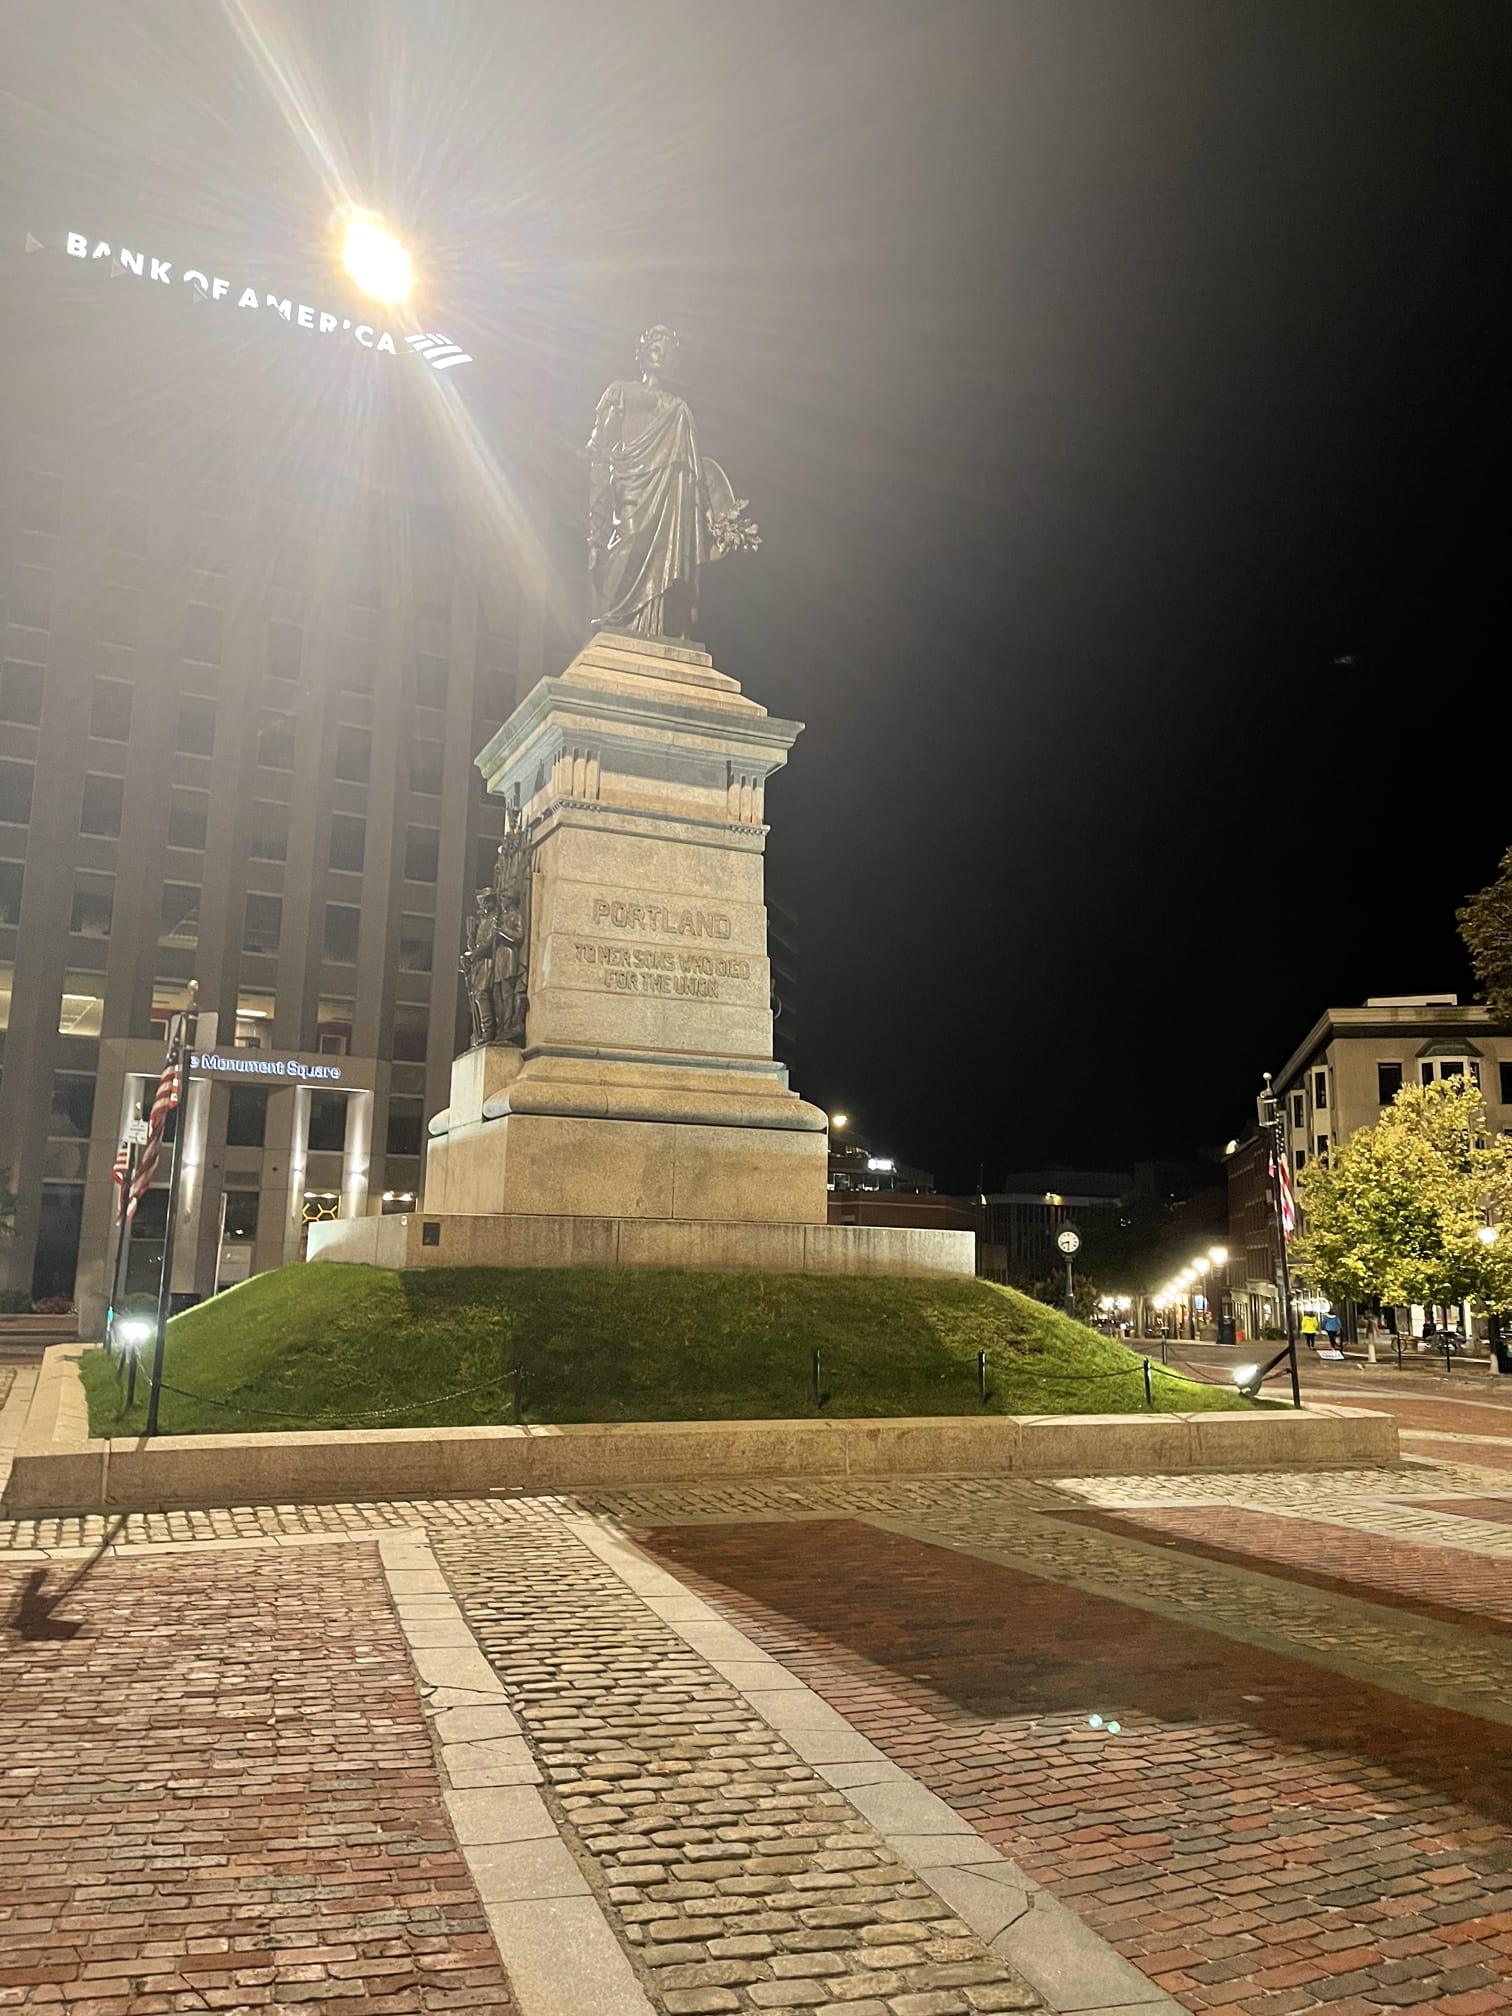 Lol portland has this huge monument statue that you cant even take a picture of at night because of that big ass bank of america light. 
They gotta hit up es devlin